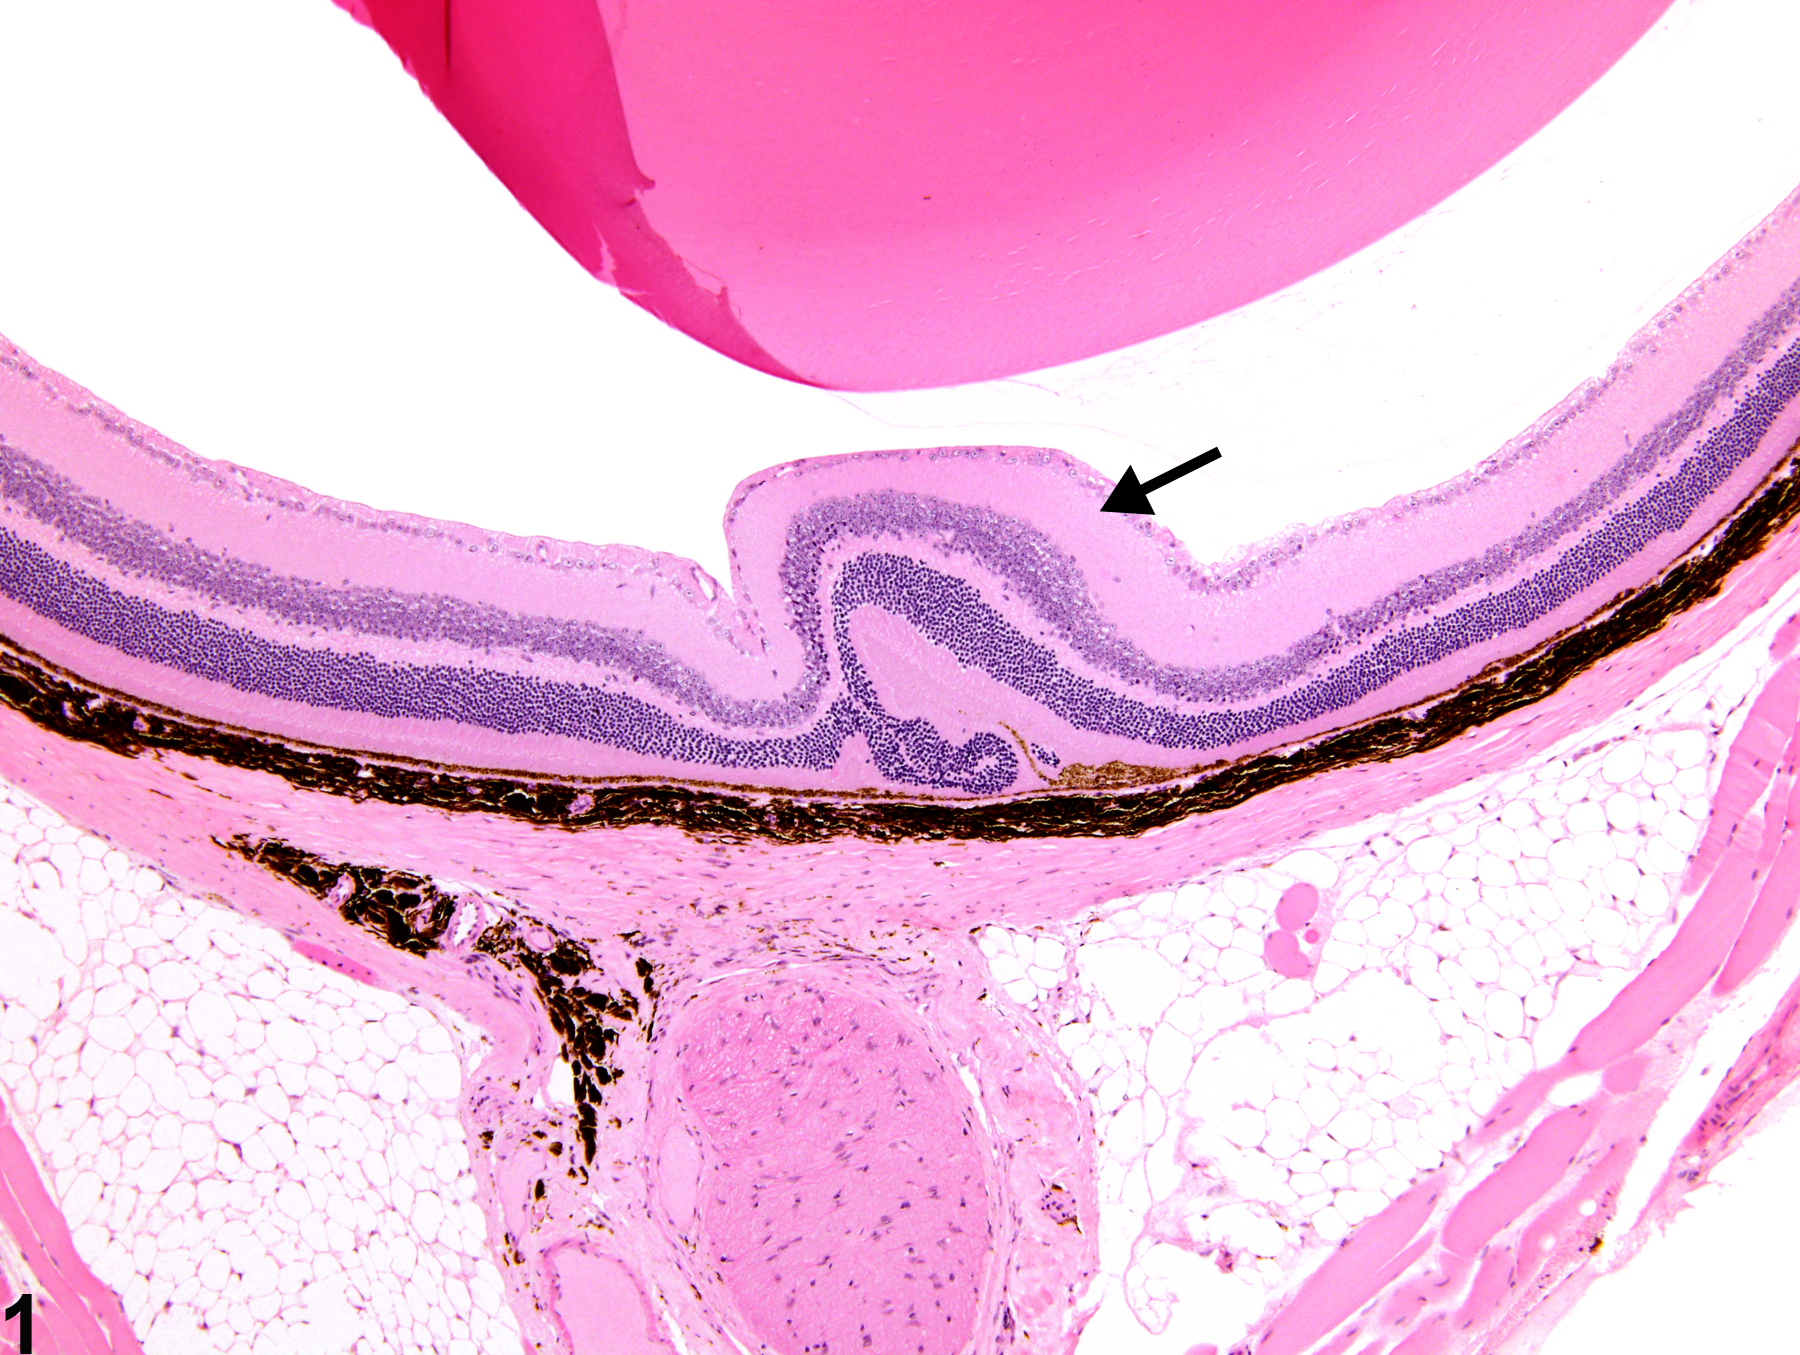 Image of retina dysplasia in the eye from a female B6C3F1 mouse in a chronic study